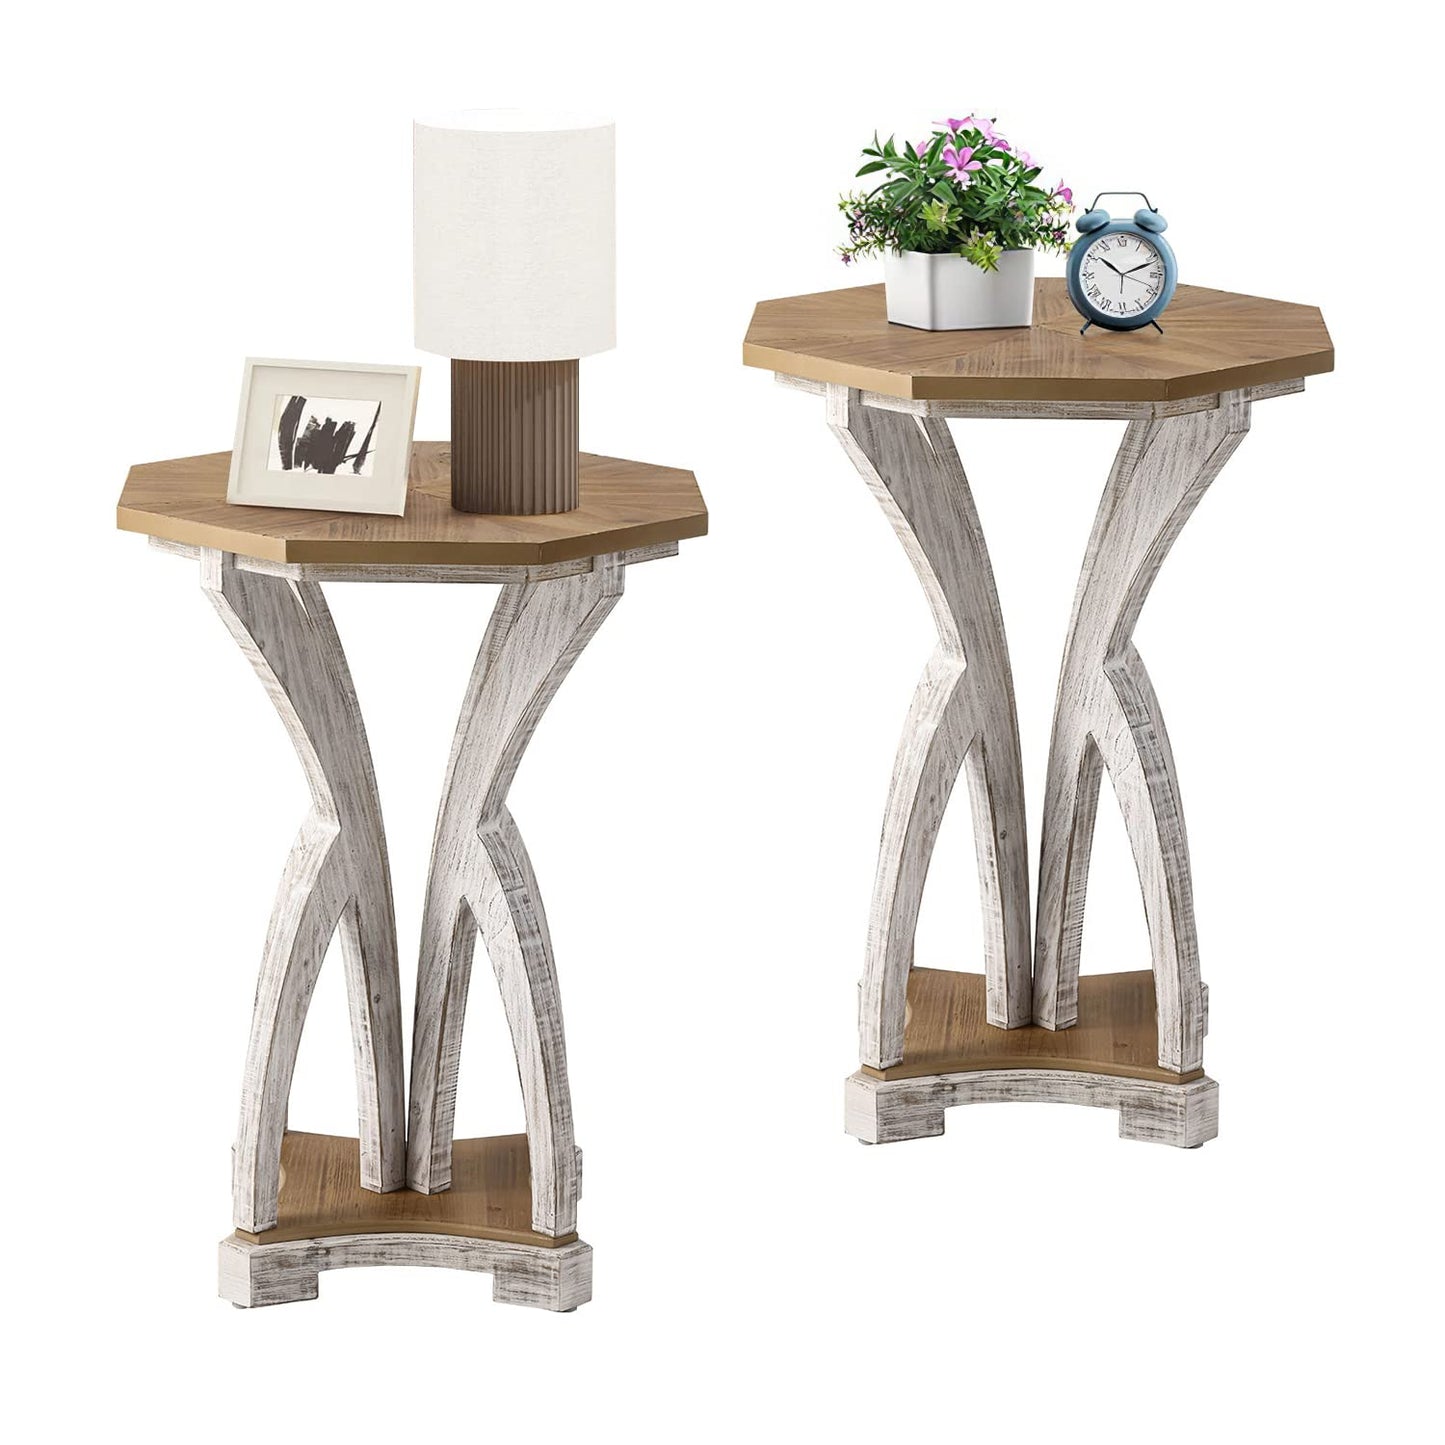 COSIEST Set of 2 Rustic Accent End Table, Octagonal Farmhouse Wood Side Table with Curved Legs Pedestal Design for Living Room, Bedroom, Distressed Whitewash Finish